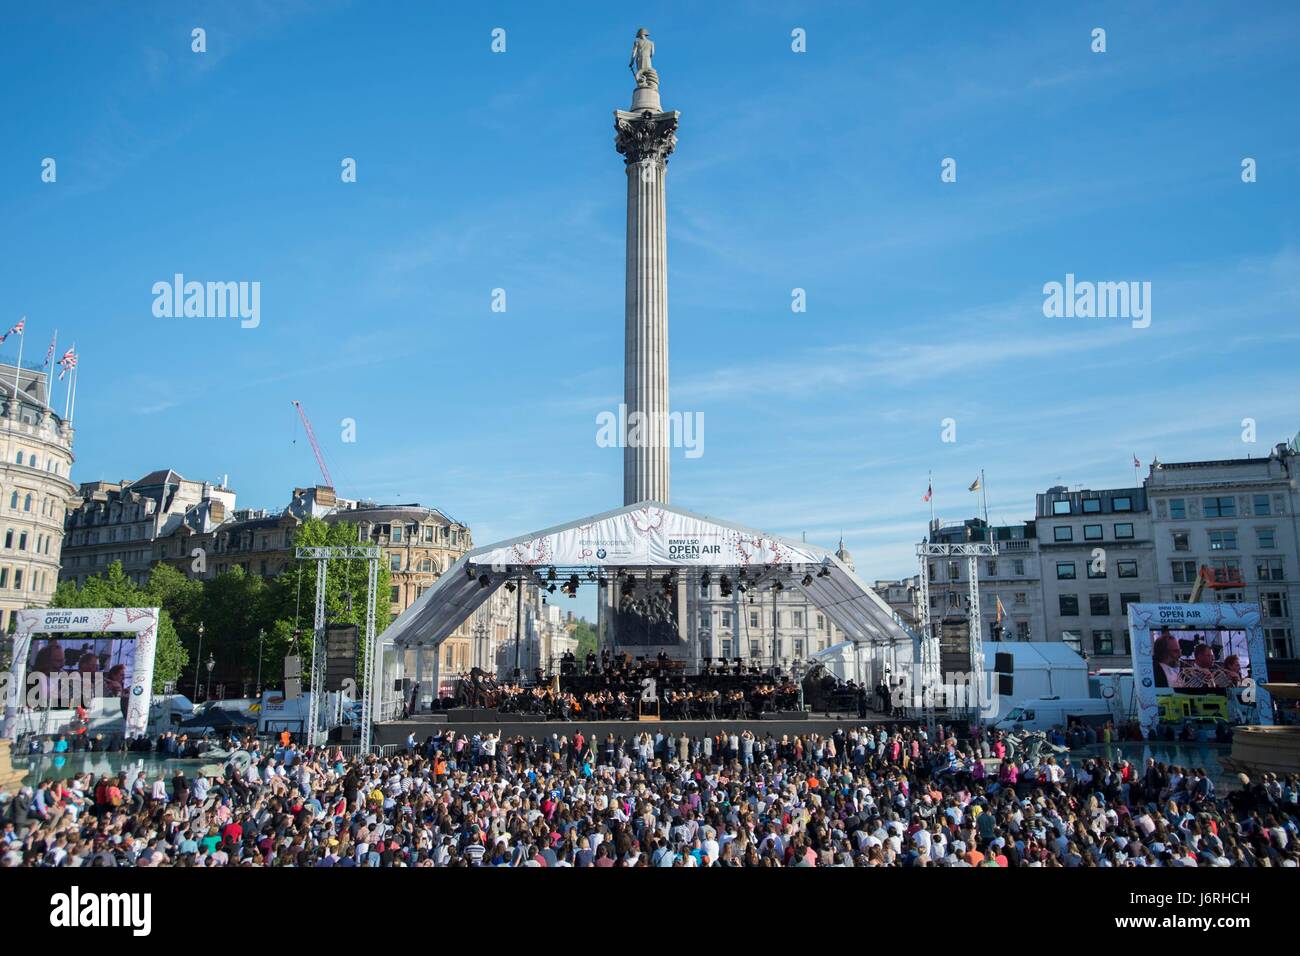 Members of the public watch the London Symphony Orchestra play a programme of Rachmaninov in Trafalgar Square, central London. Stock Photo